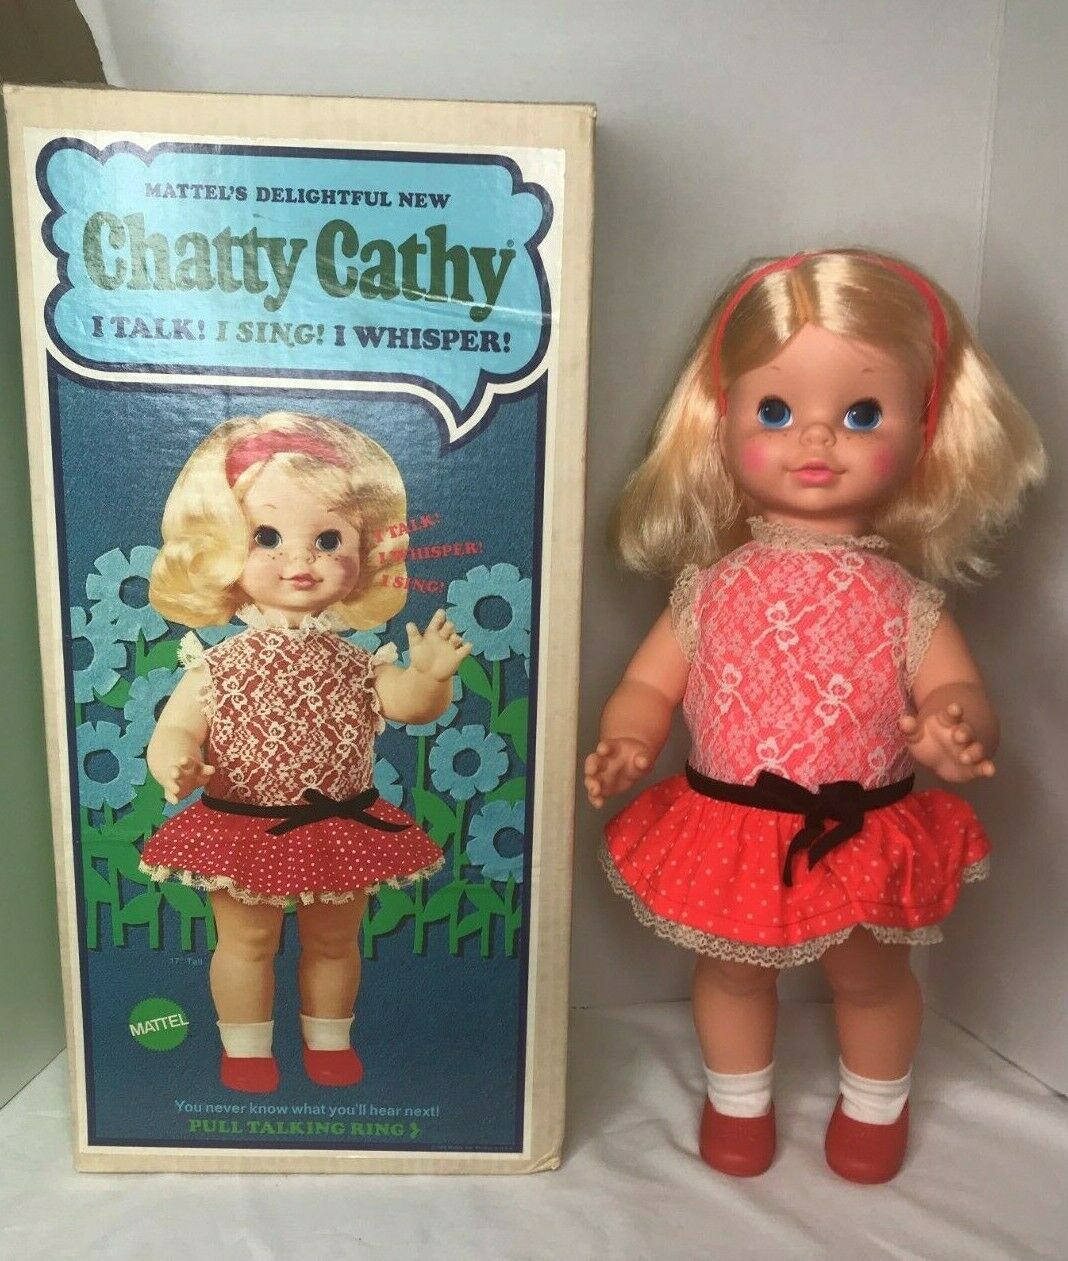 Original Mattel Chatty Cathy Doll With Box 1969 Excellent